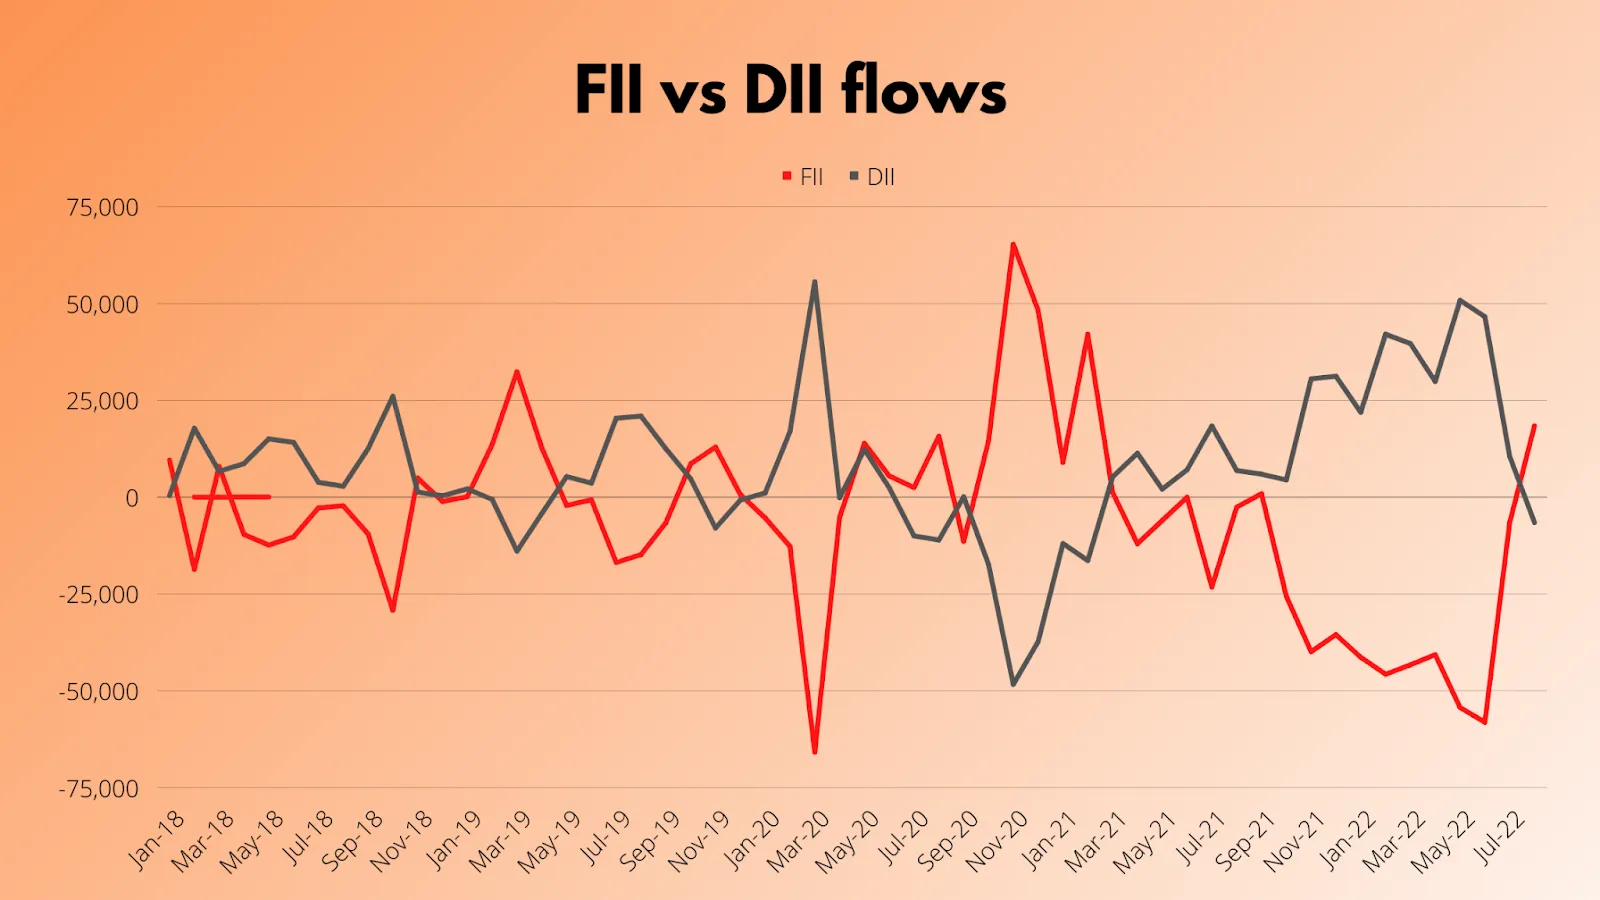 Why are FIIs buying into the Indian market?